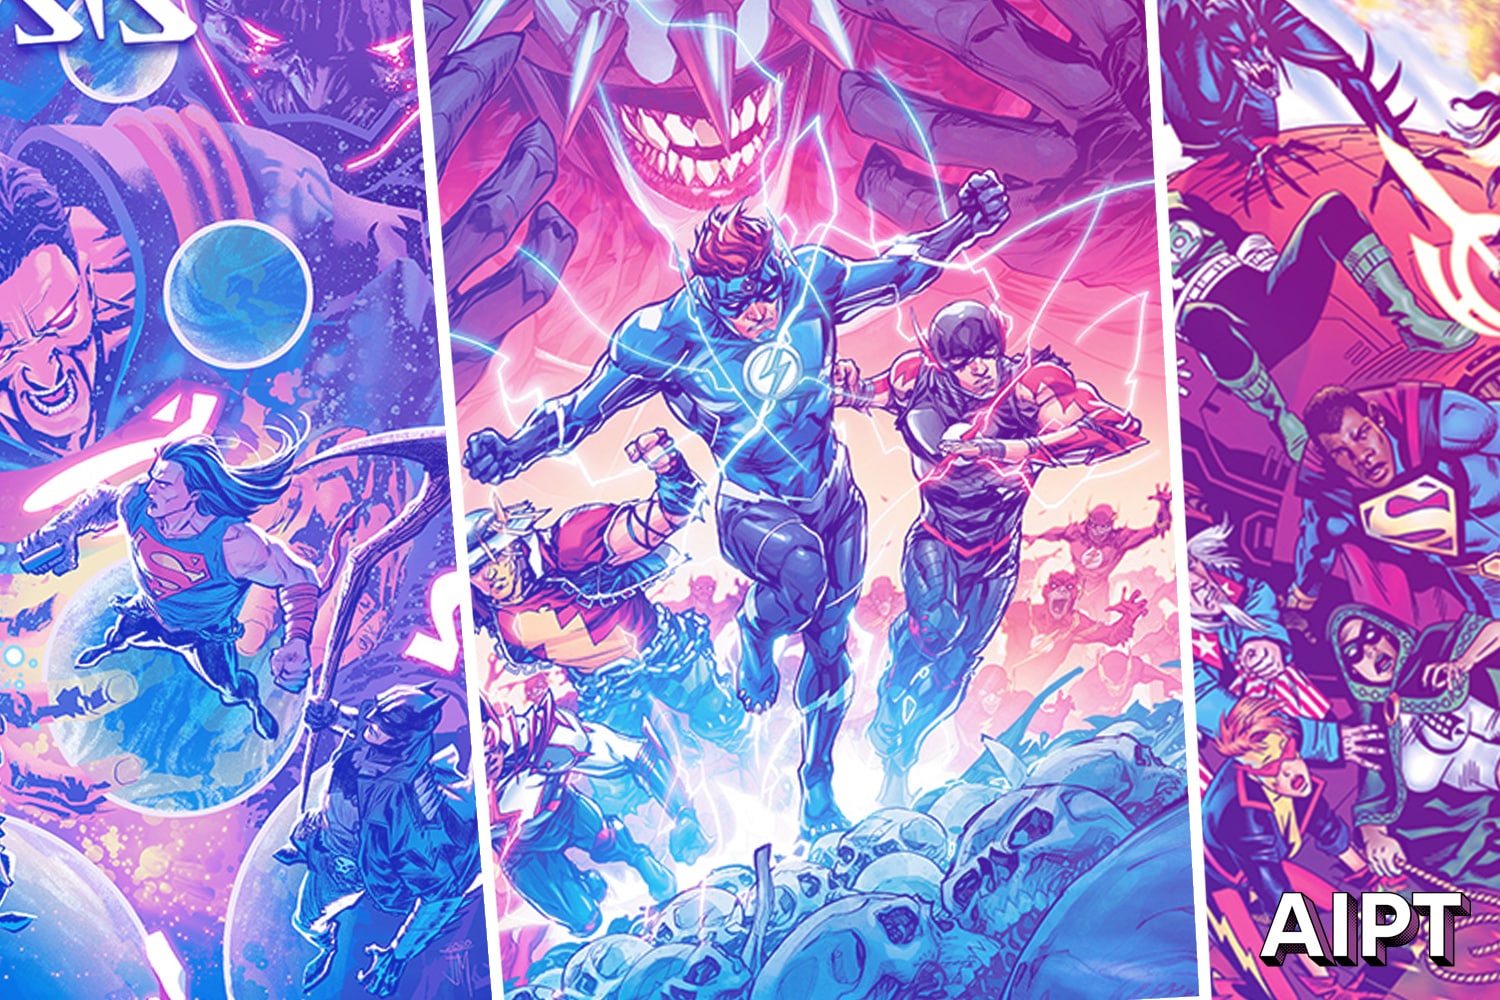 Dark Nights: Death Metal gets 48-page one-shots Trinity Crisis, Speed Metal, and Multiverse's End